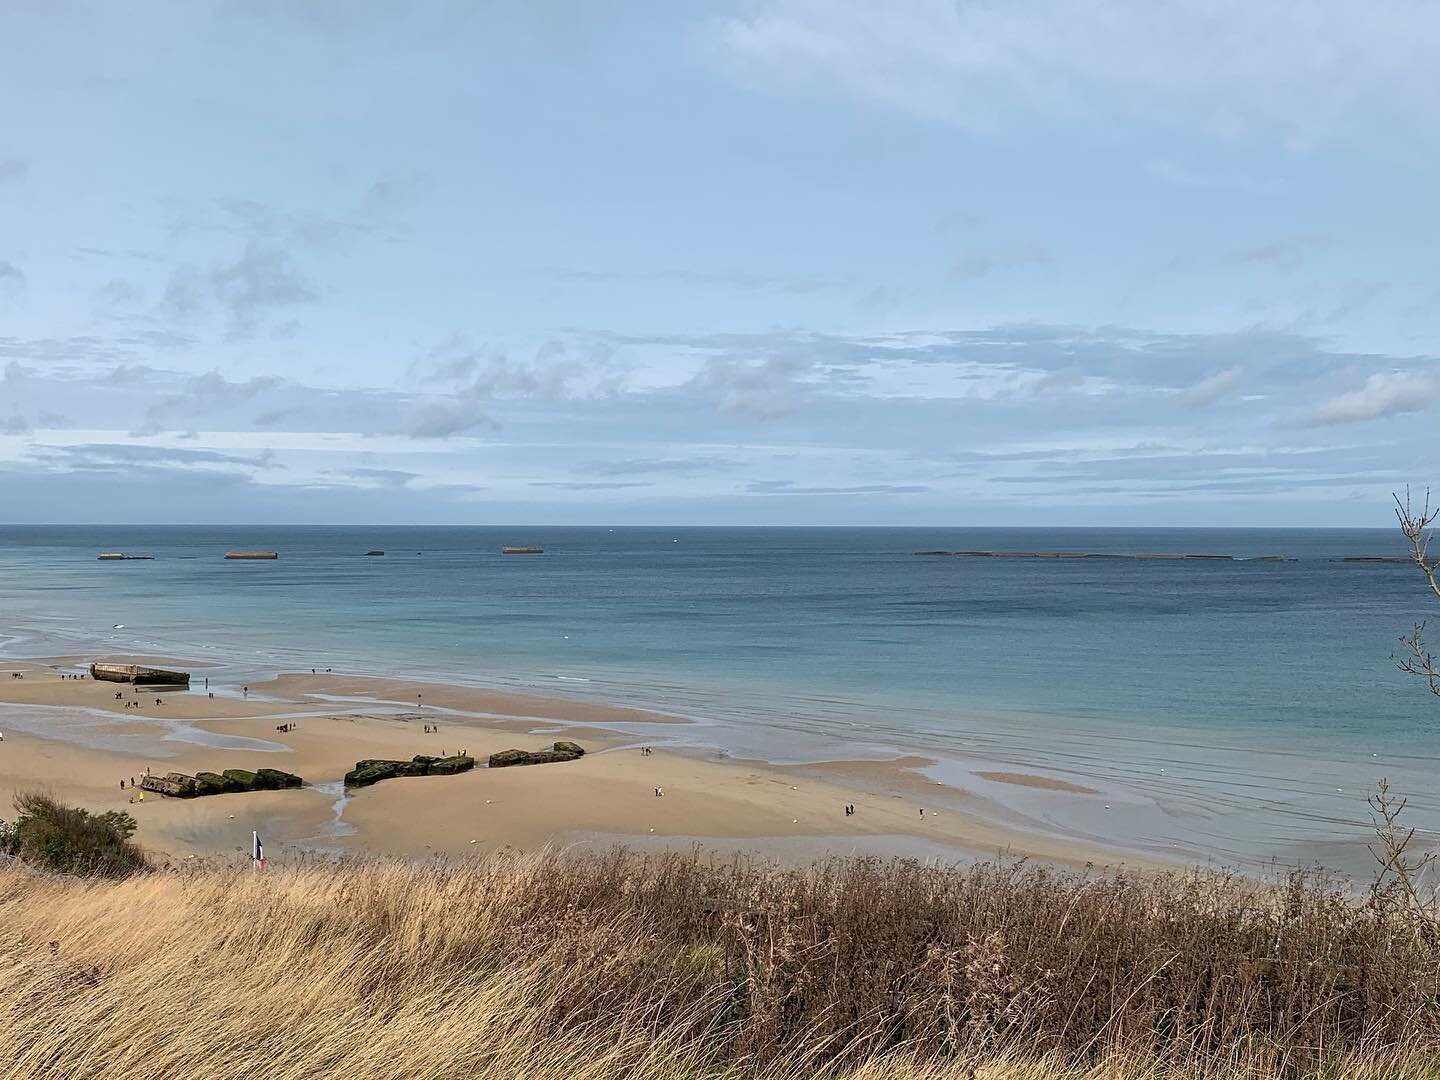 Arromanches-les-Bains is one of my favorite Normandy Landings beaches thanks to its artificial port. At low tide, you can explore the remains of the massive metal structures that were built in Britain and floated across to France in preparation for O